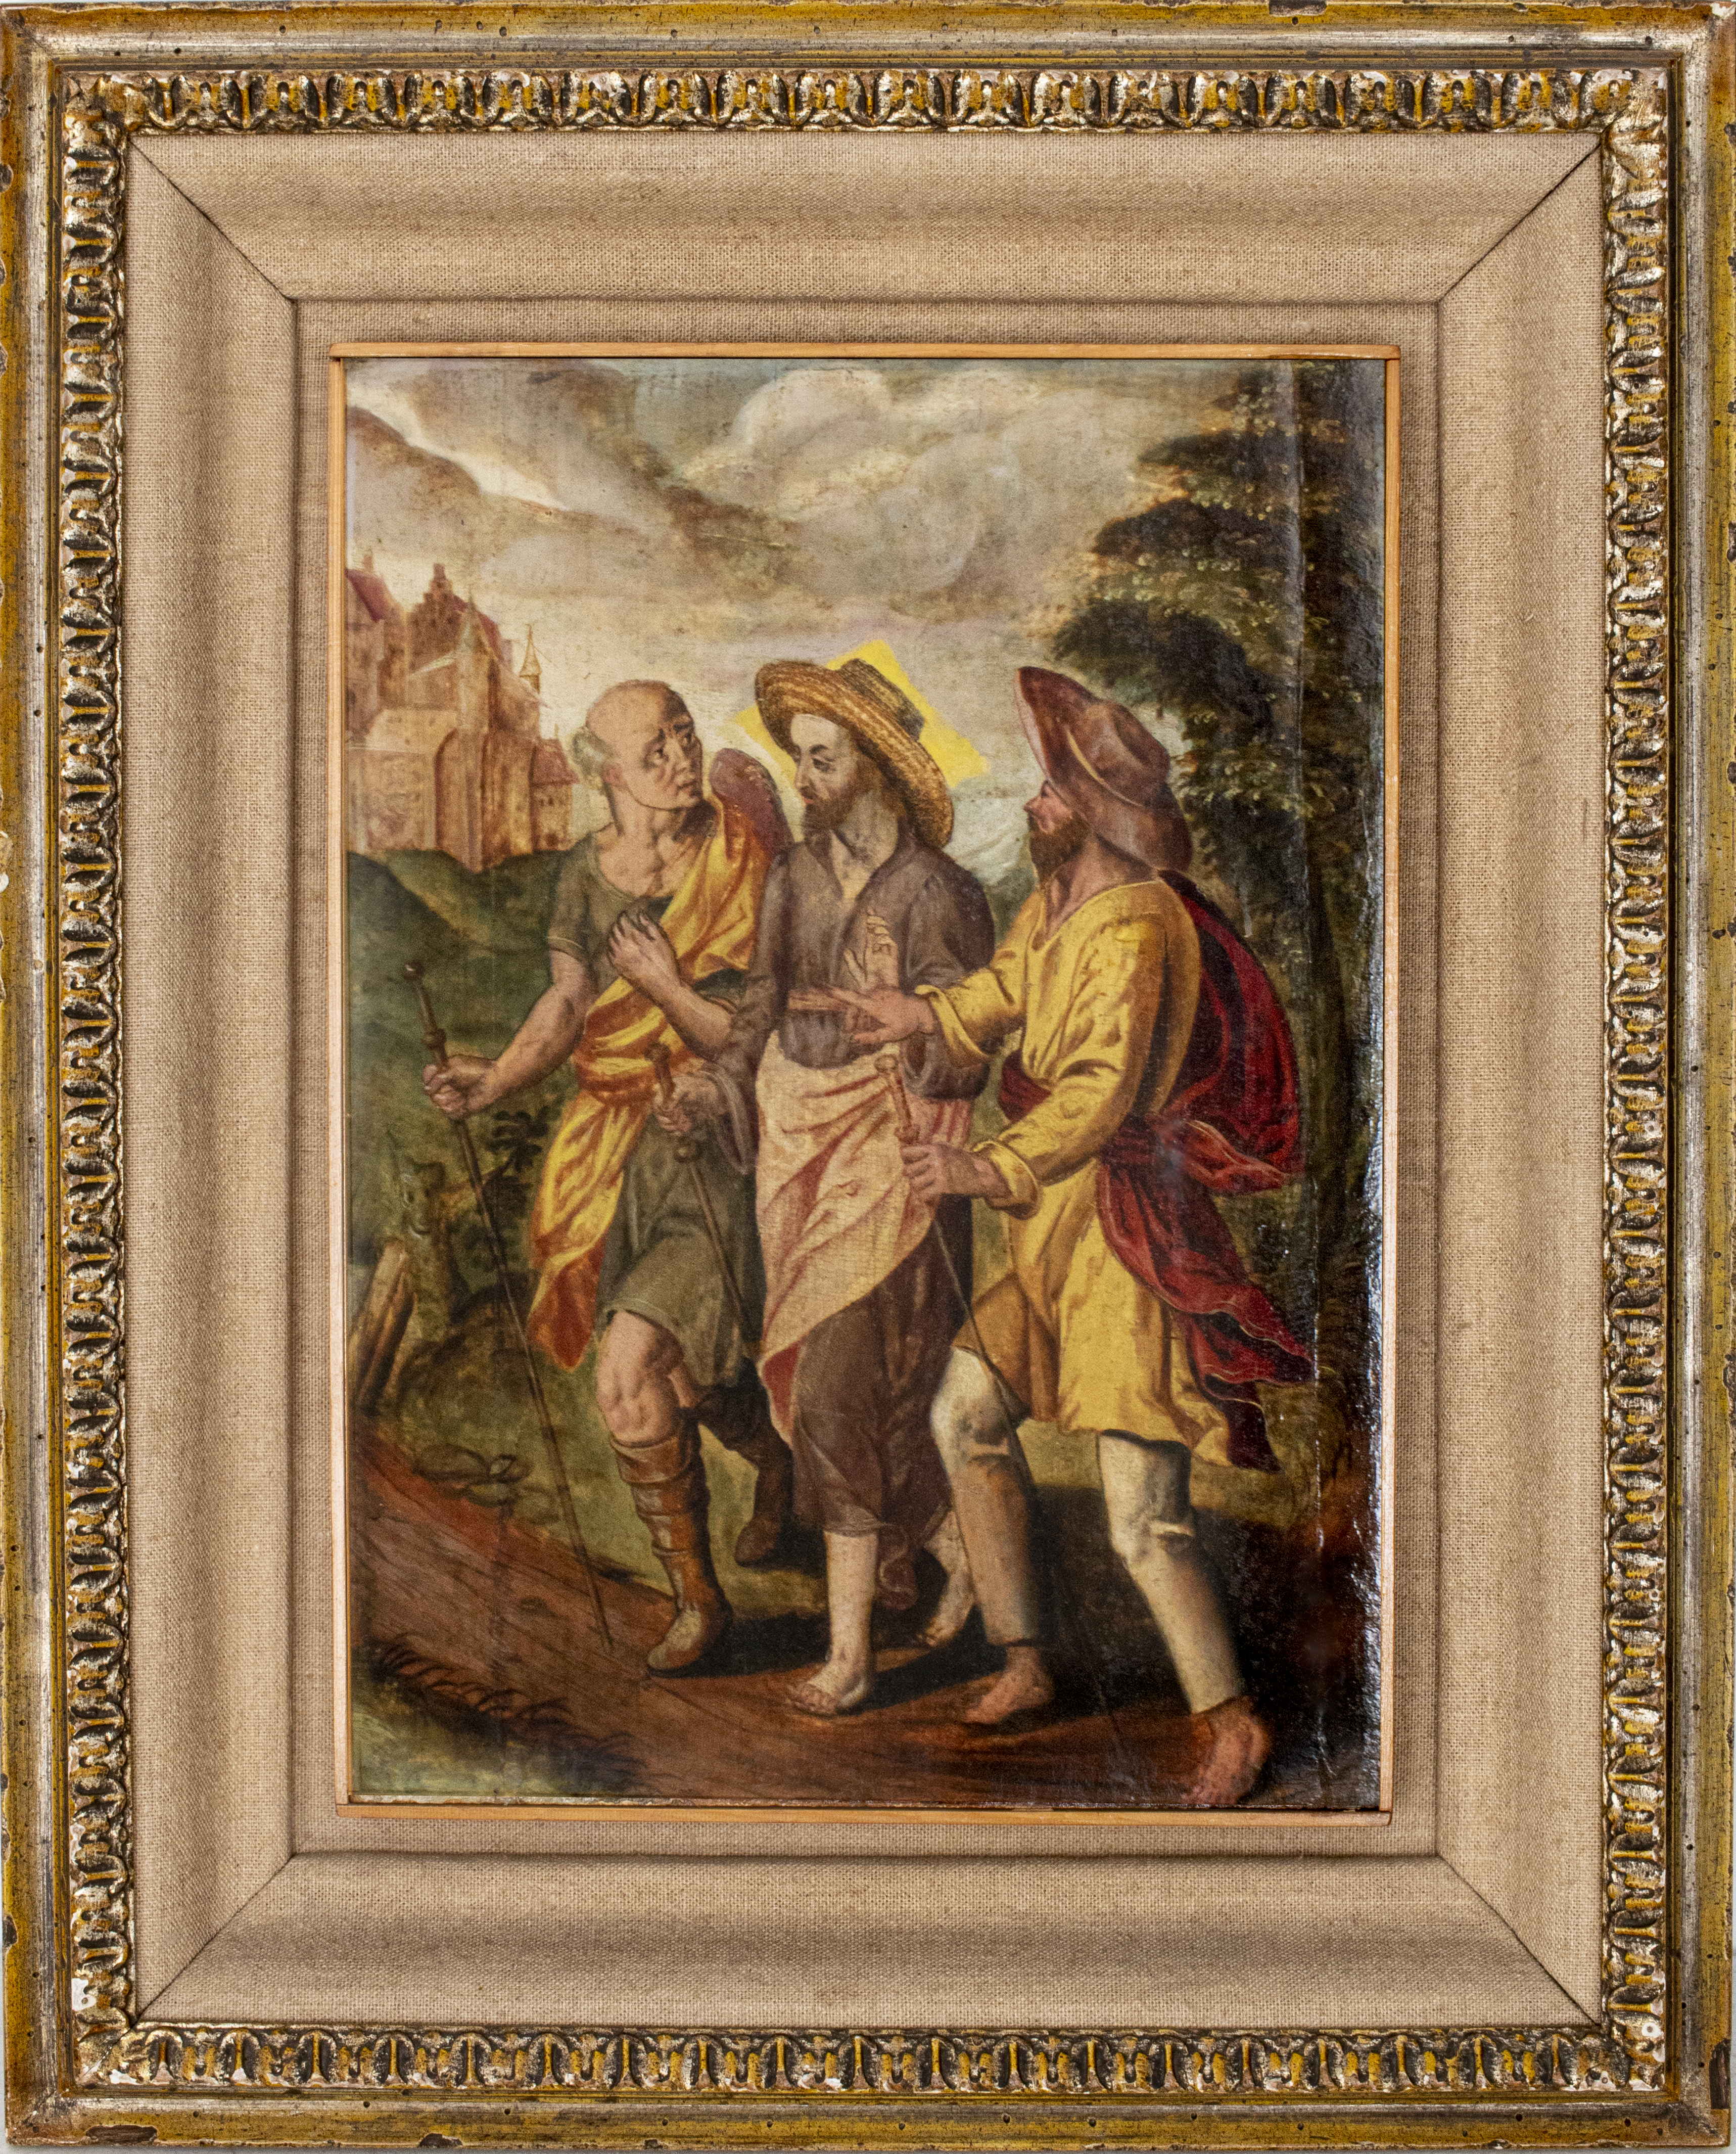 ANTIQUE PAINTING "JESUS WITH TWO